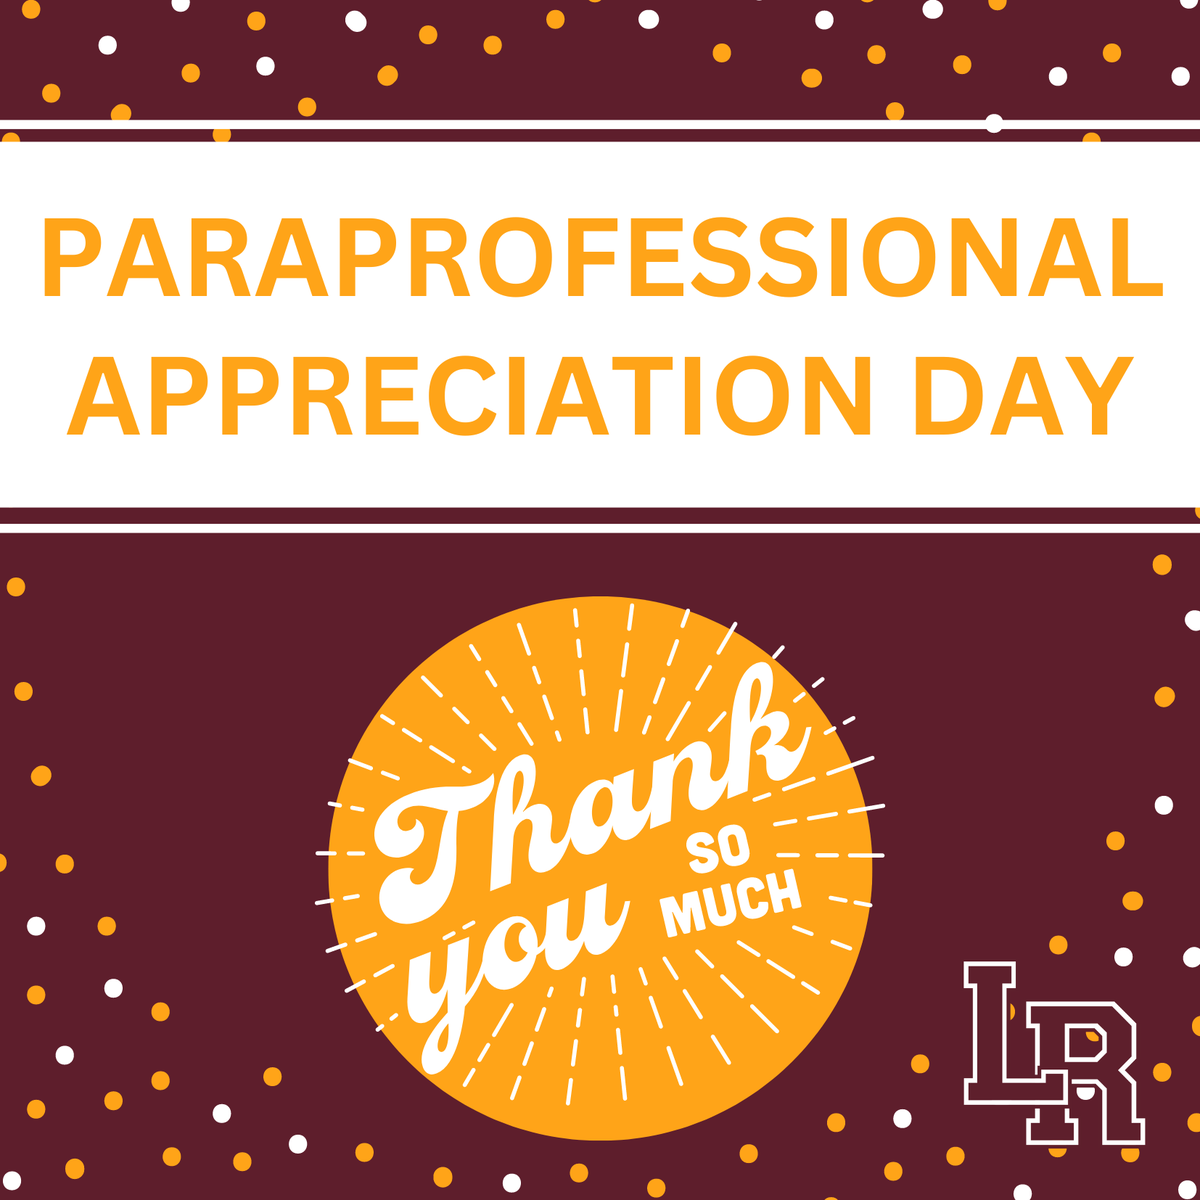 Happy Paraprofessional Appreciation Day to our incredible paraprofessionals at LR! Your dedication, support, and compassion make a world of difference every single day! We appreciate all you do for our Wildcats! #WeAreLR